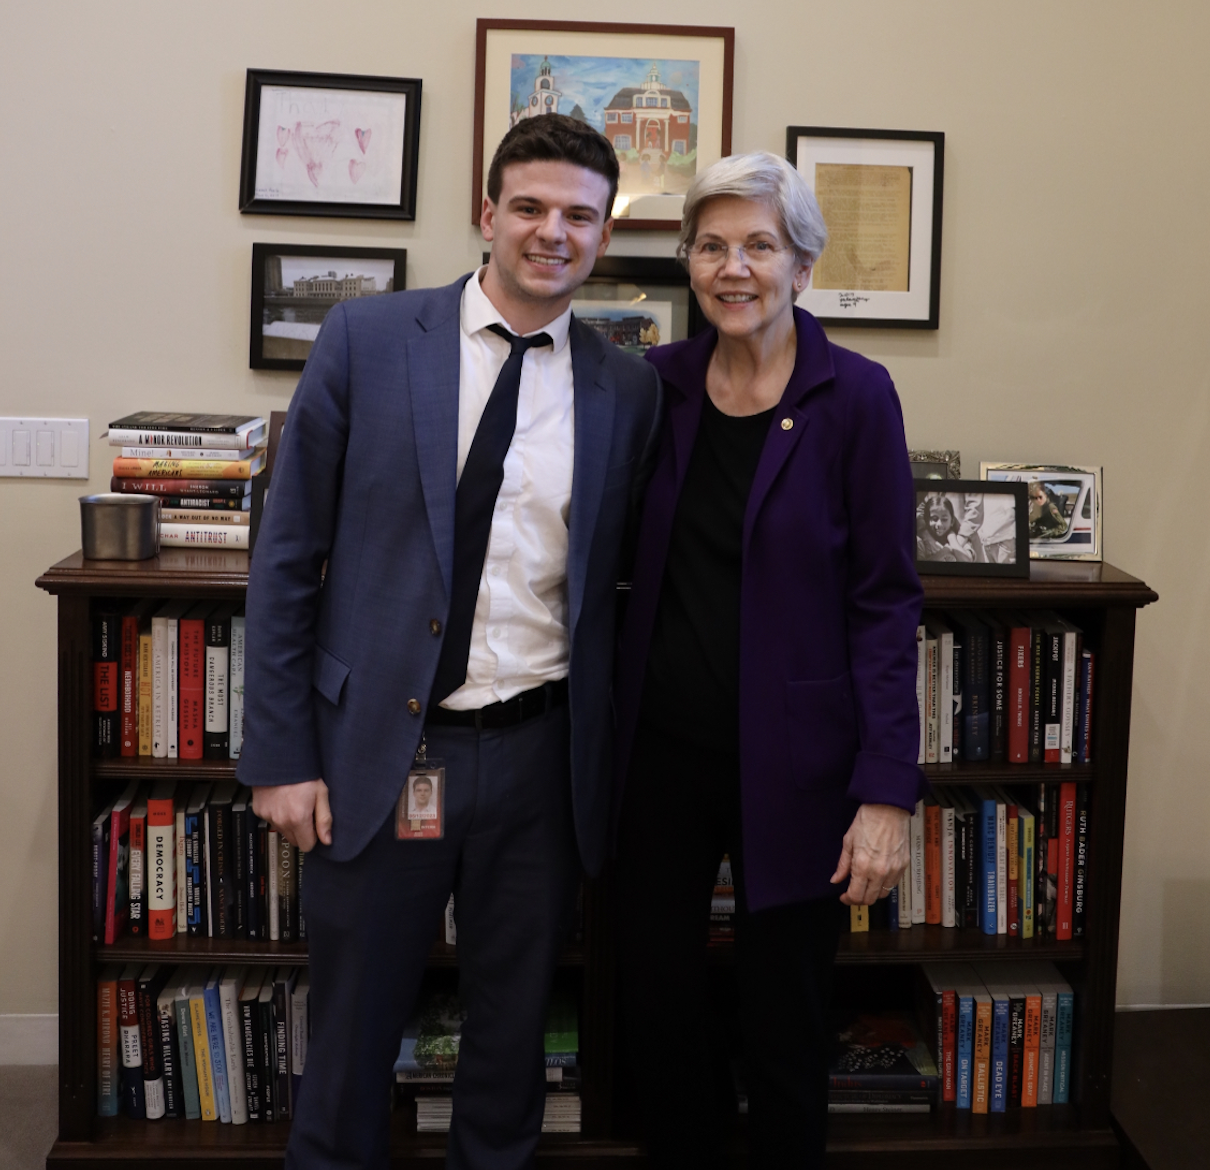 Newhouse student Aidan Hayes stands next to Elizabeth Warren